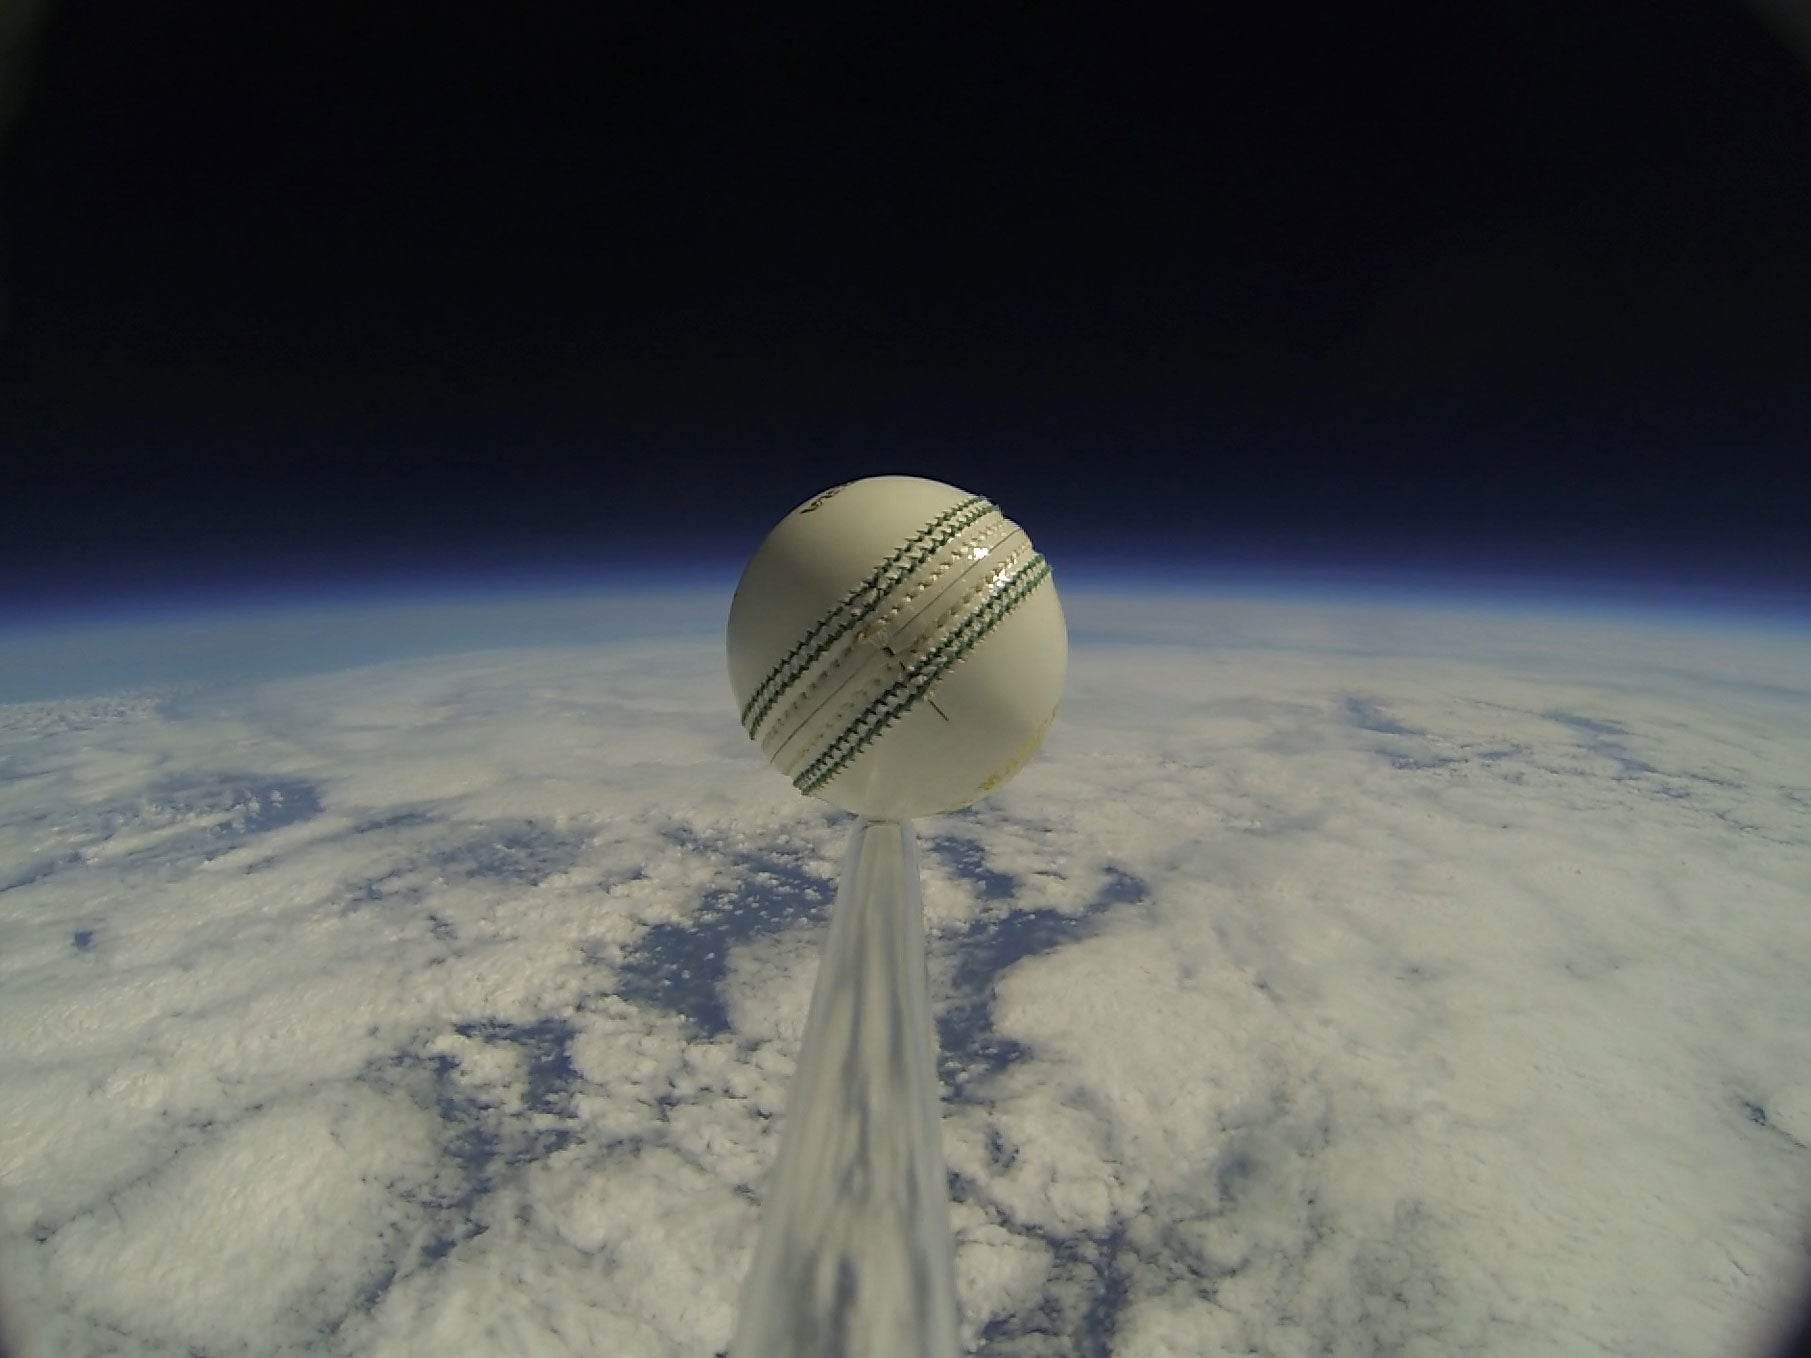 The cricket ball was attached to a helium balloon.